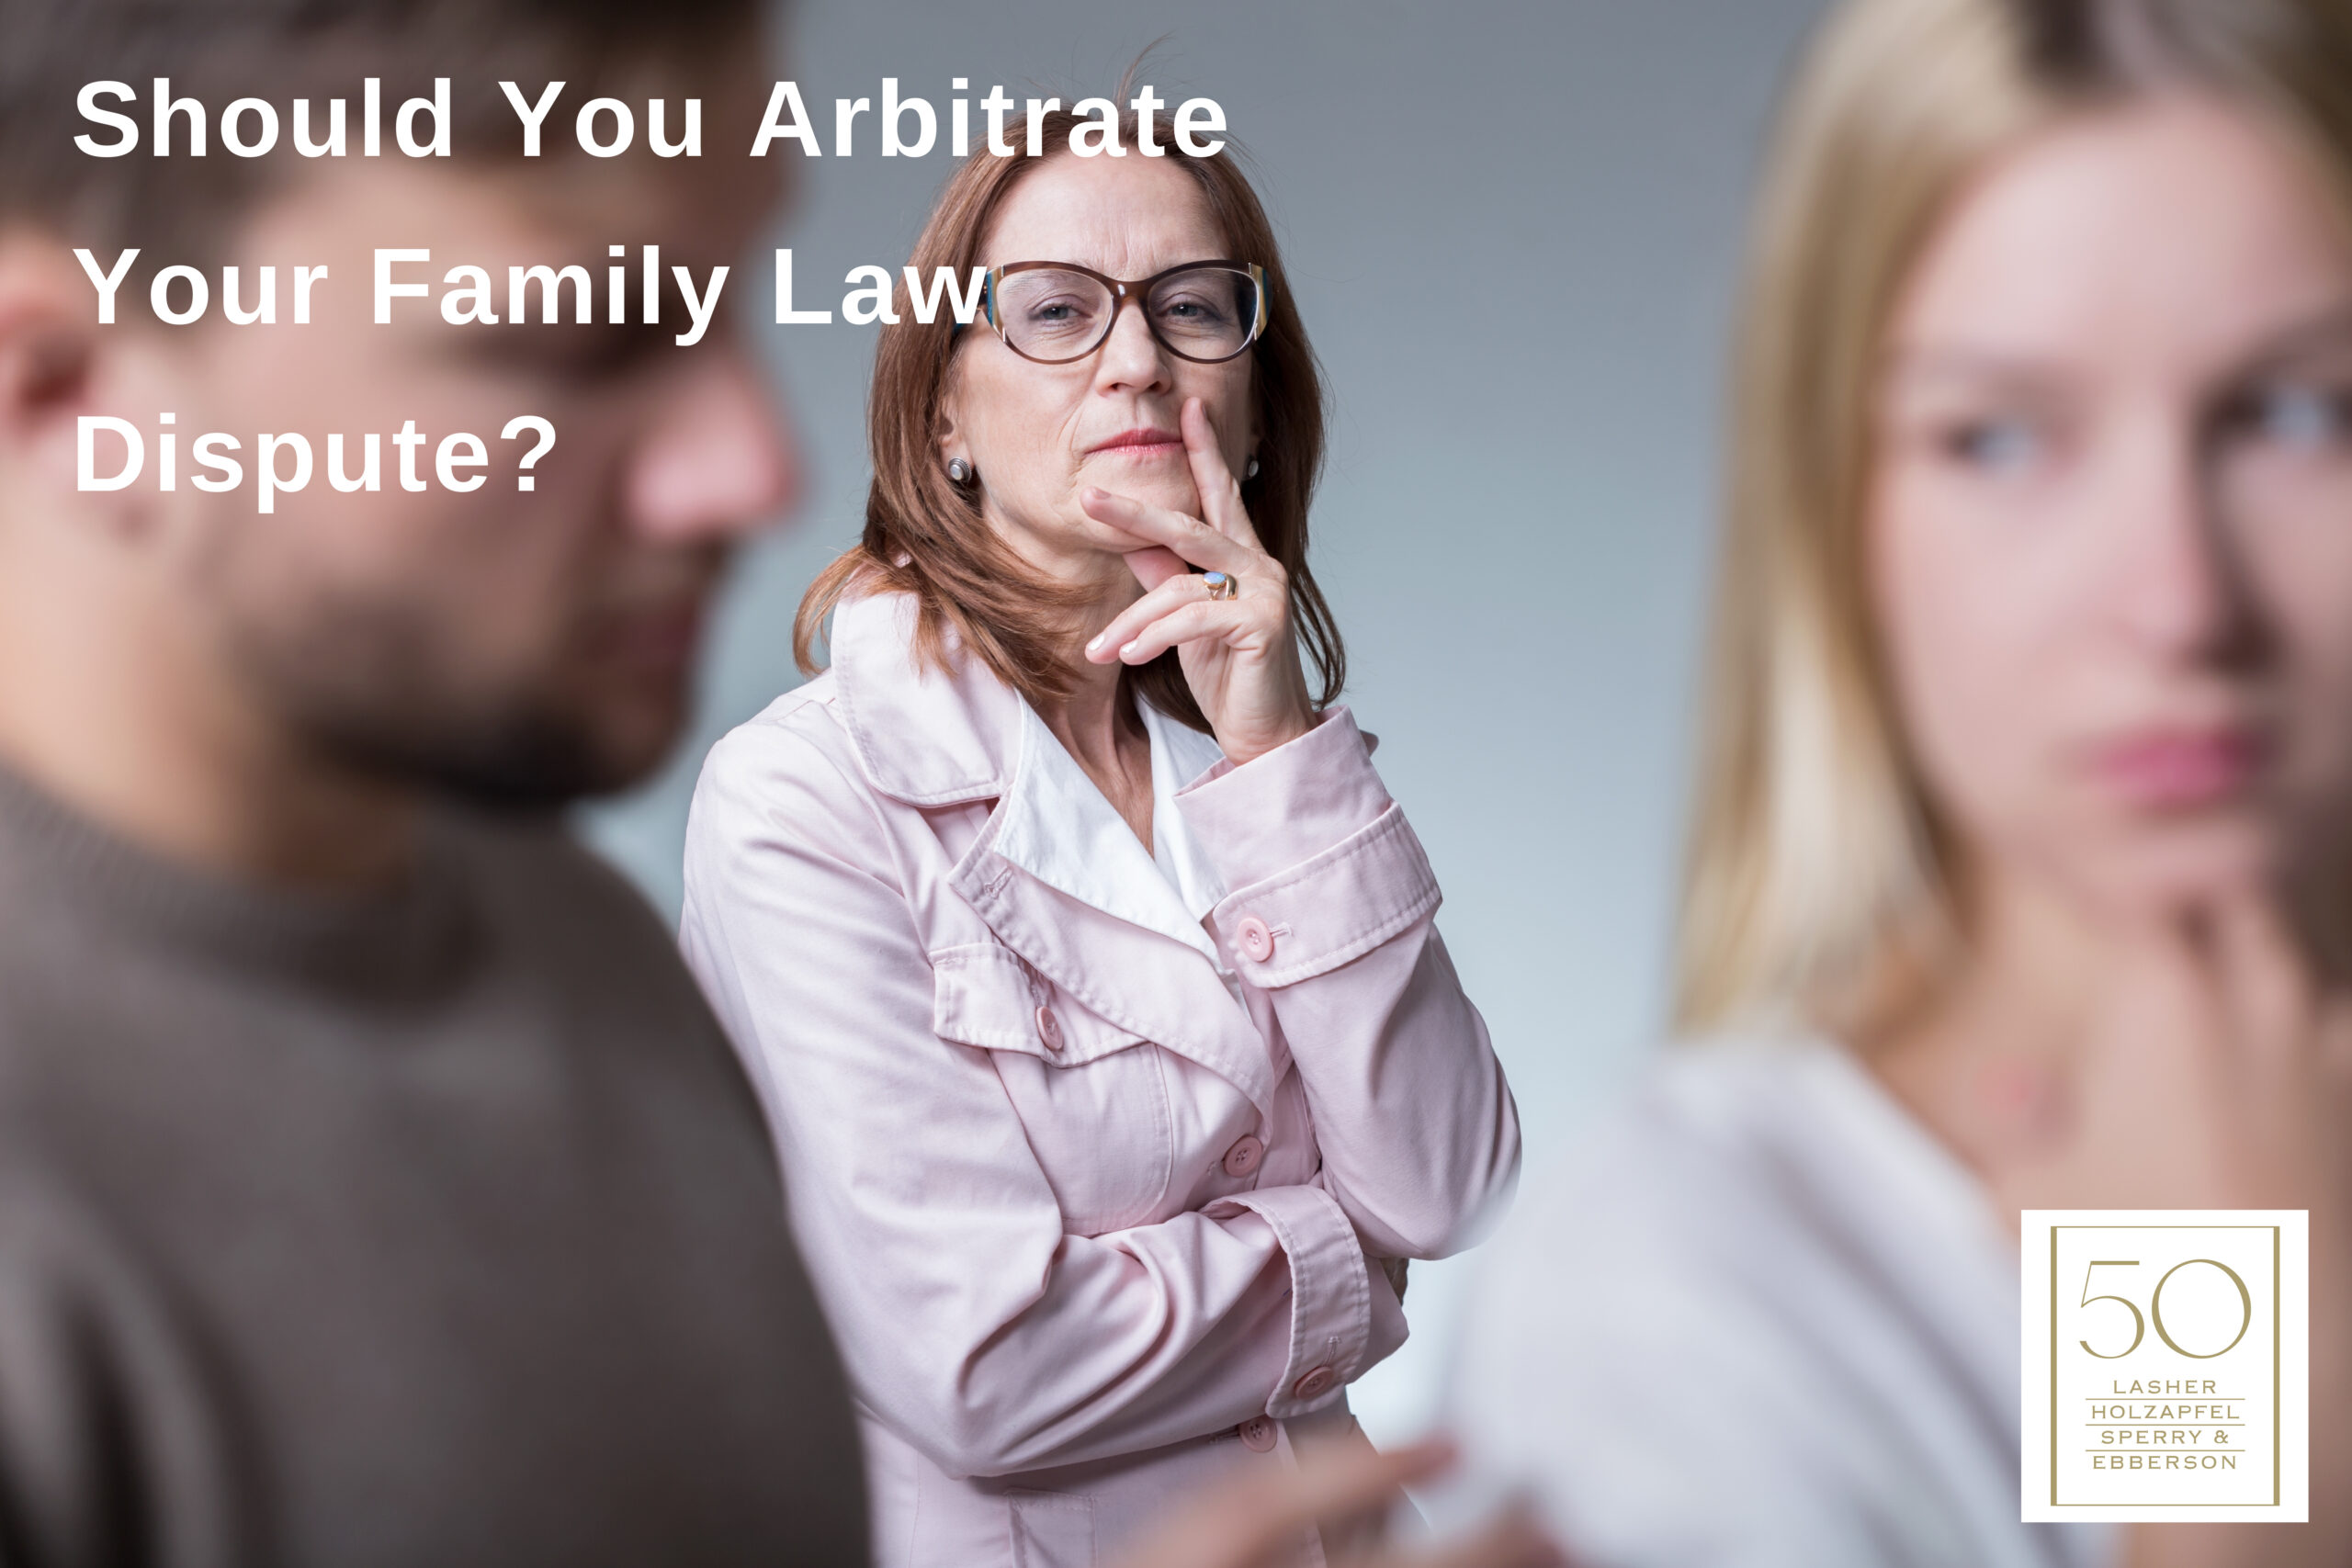 Should You Arbitrate Your Family Law Dispute?